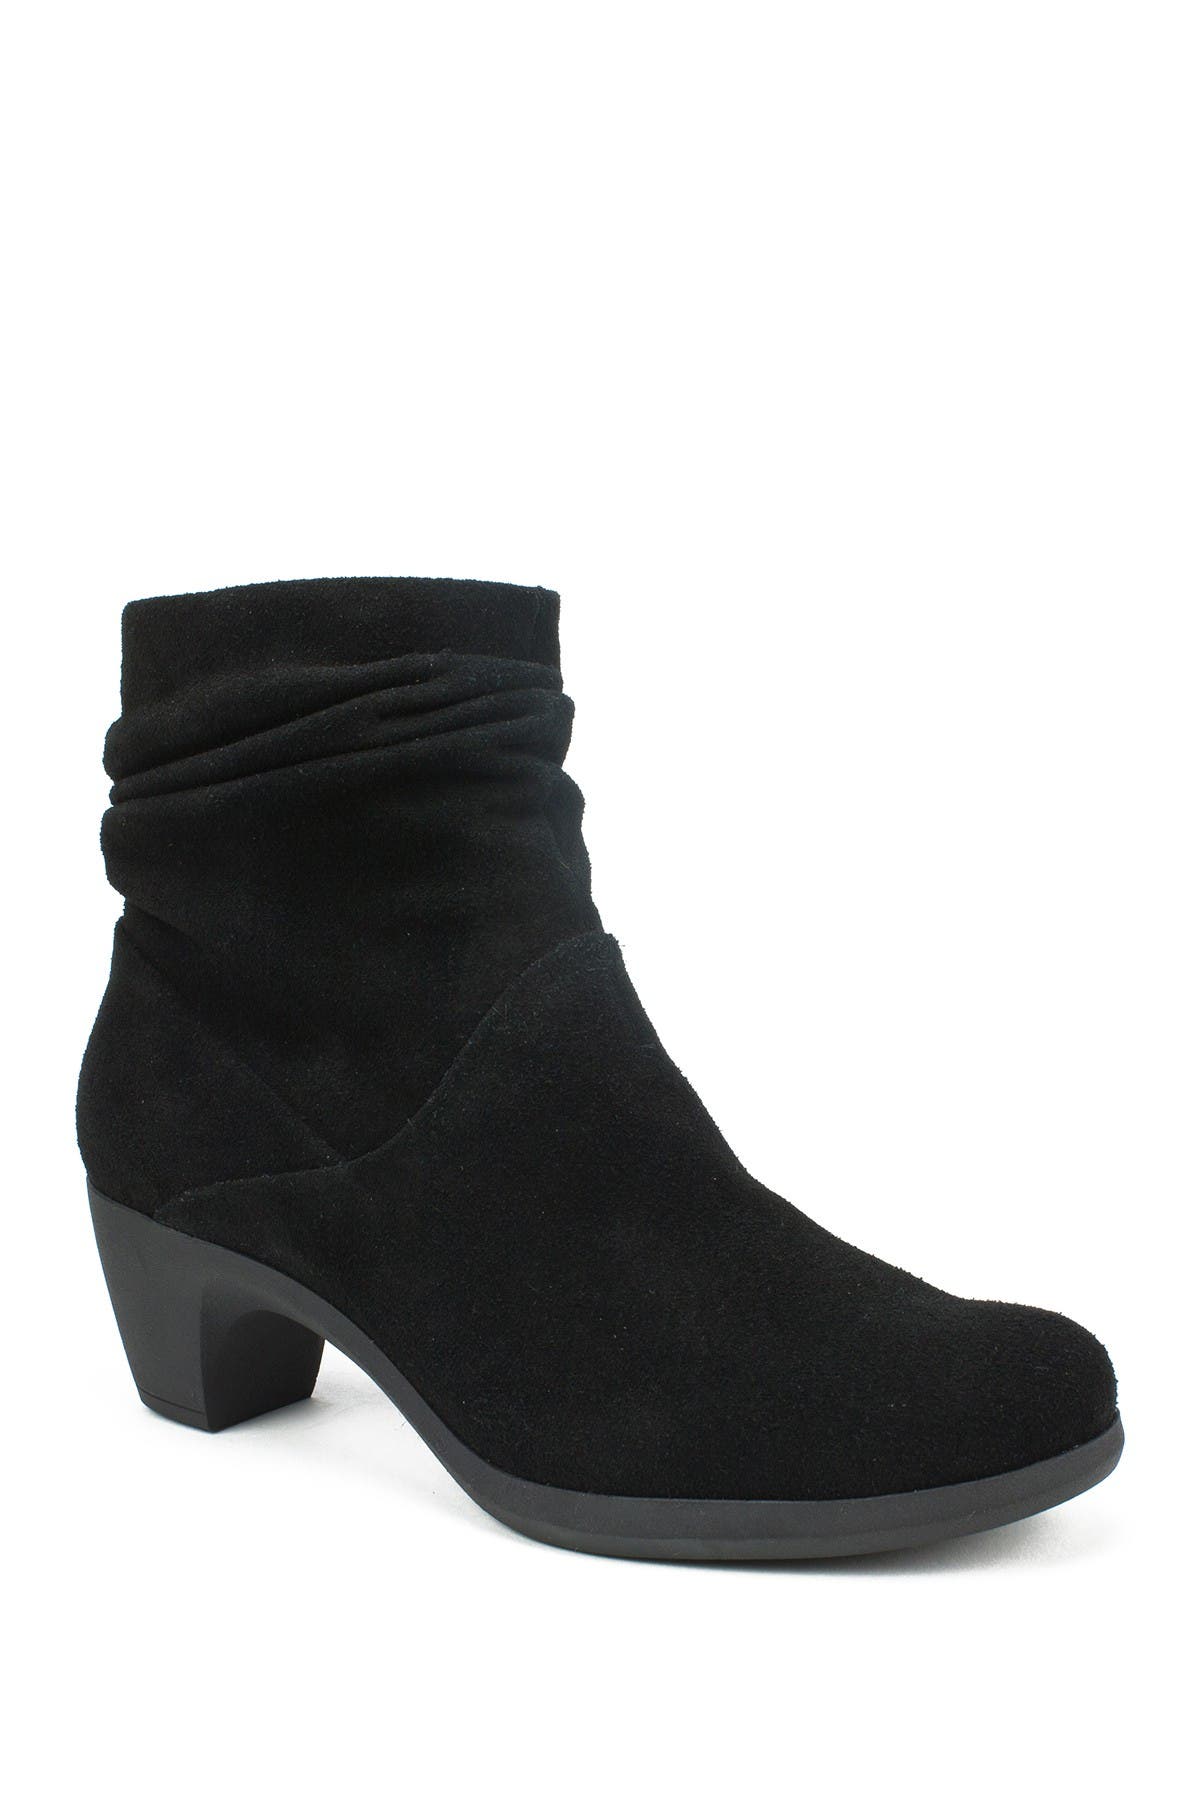 white mountain suede booties